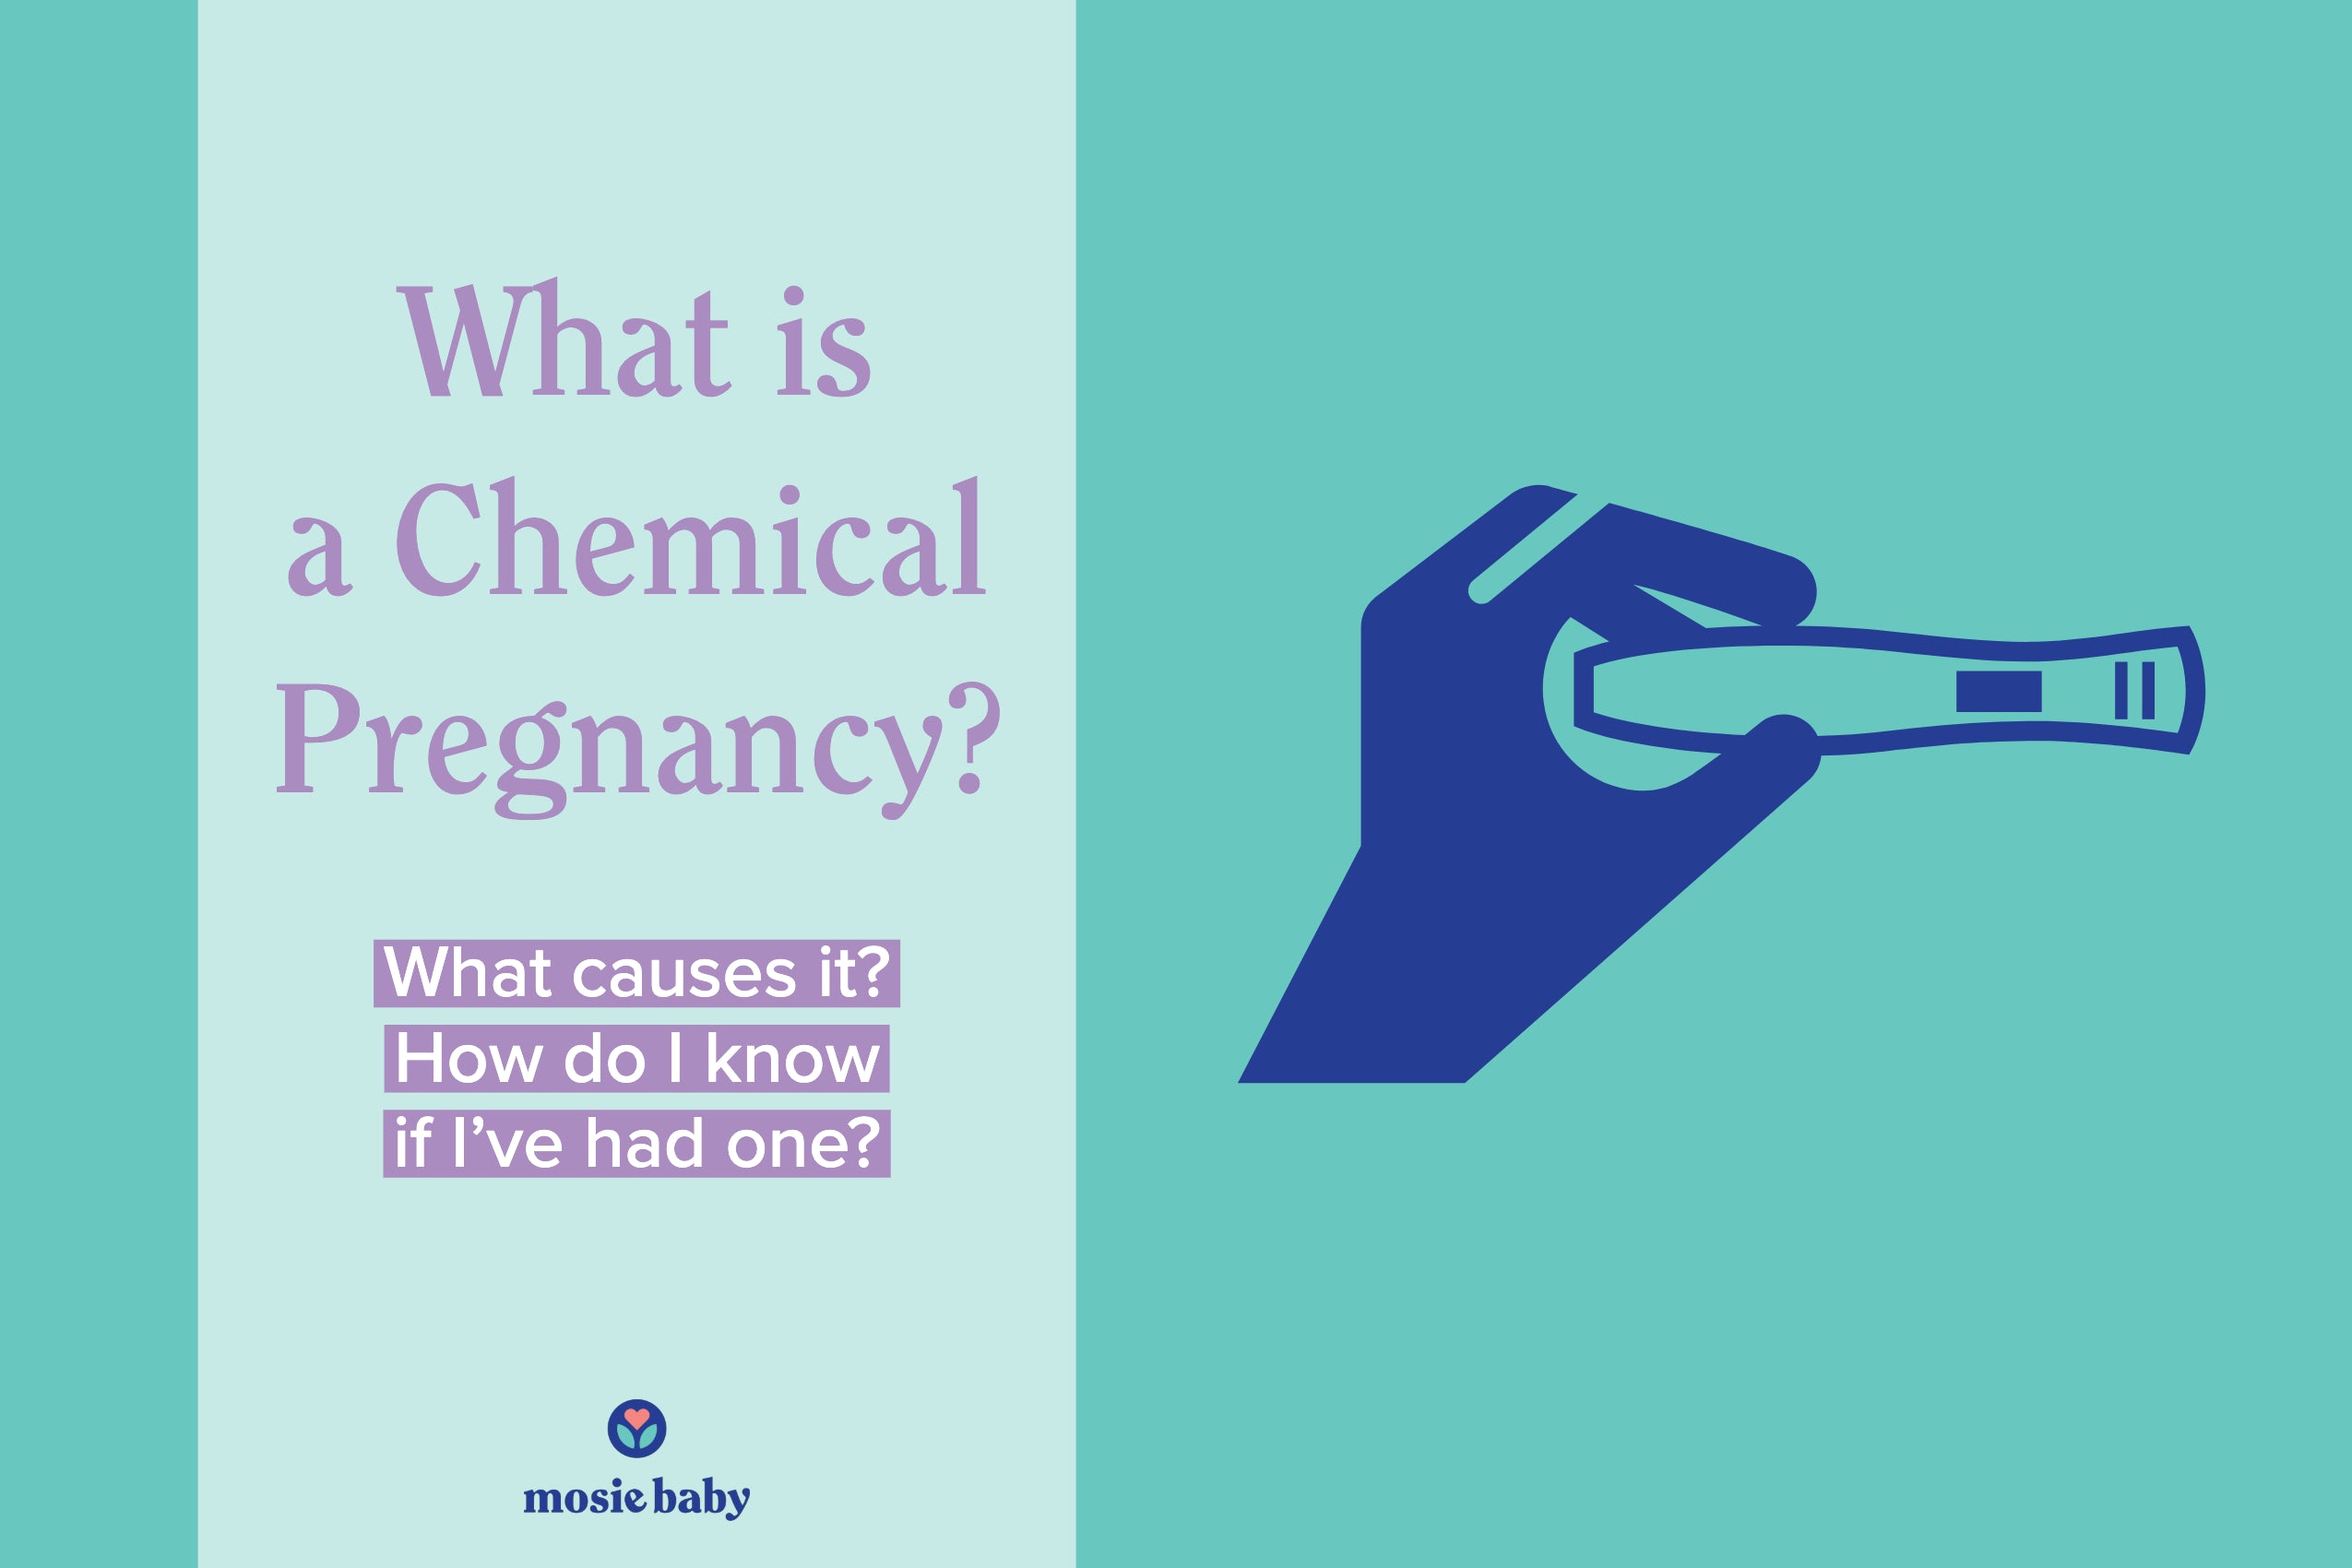 What is a Chemical Pregnancy? How do I know if I've had one